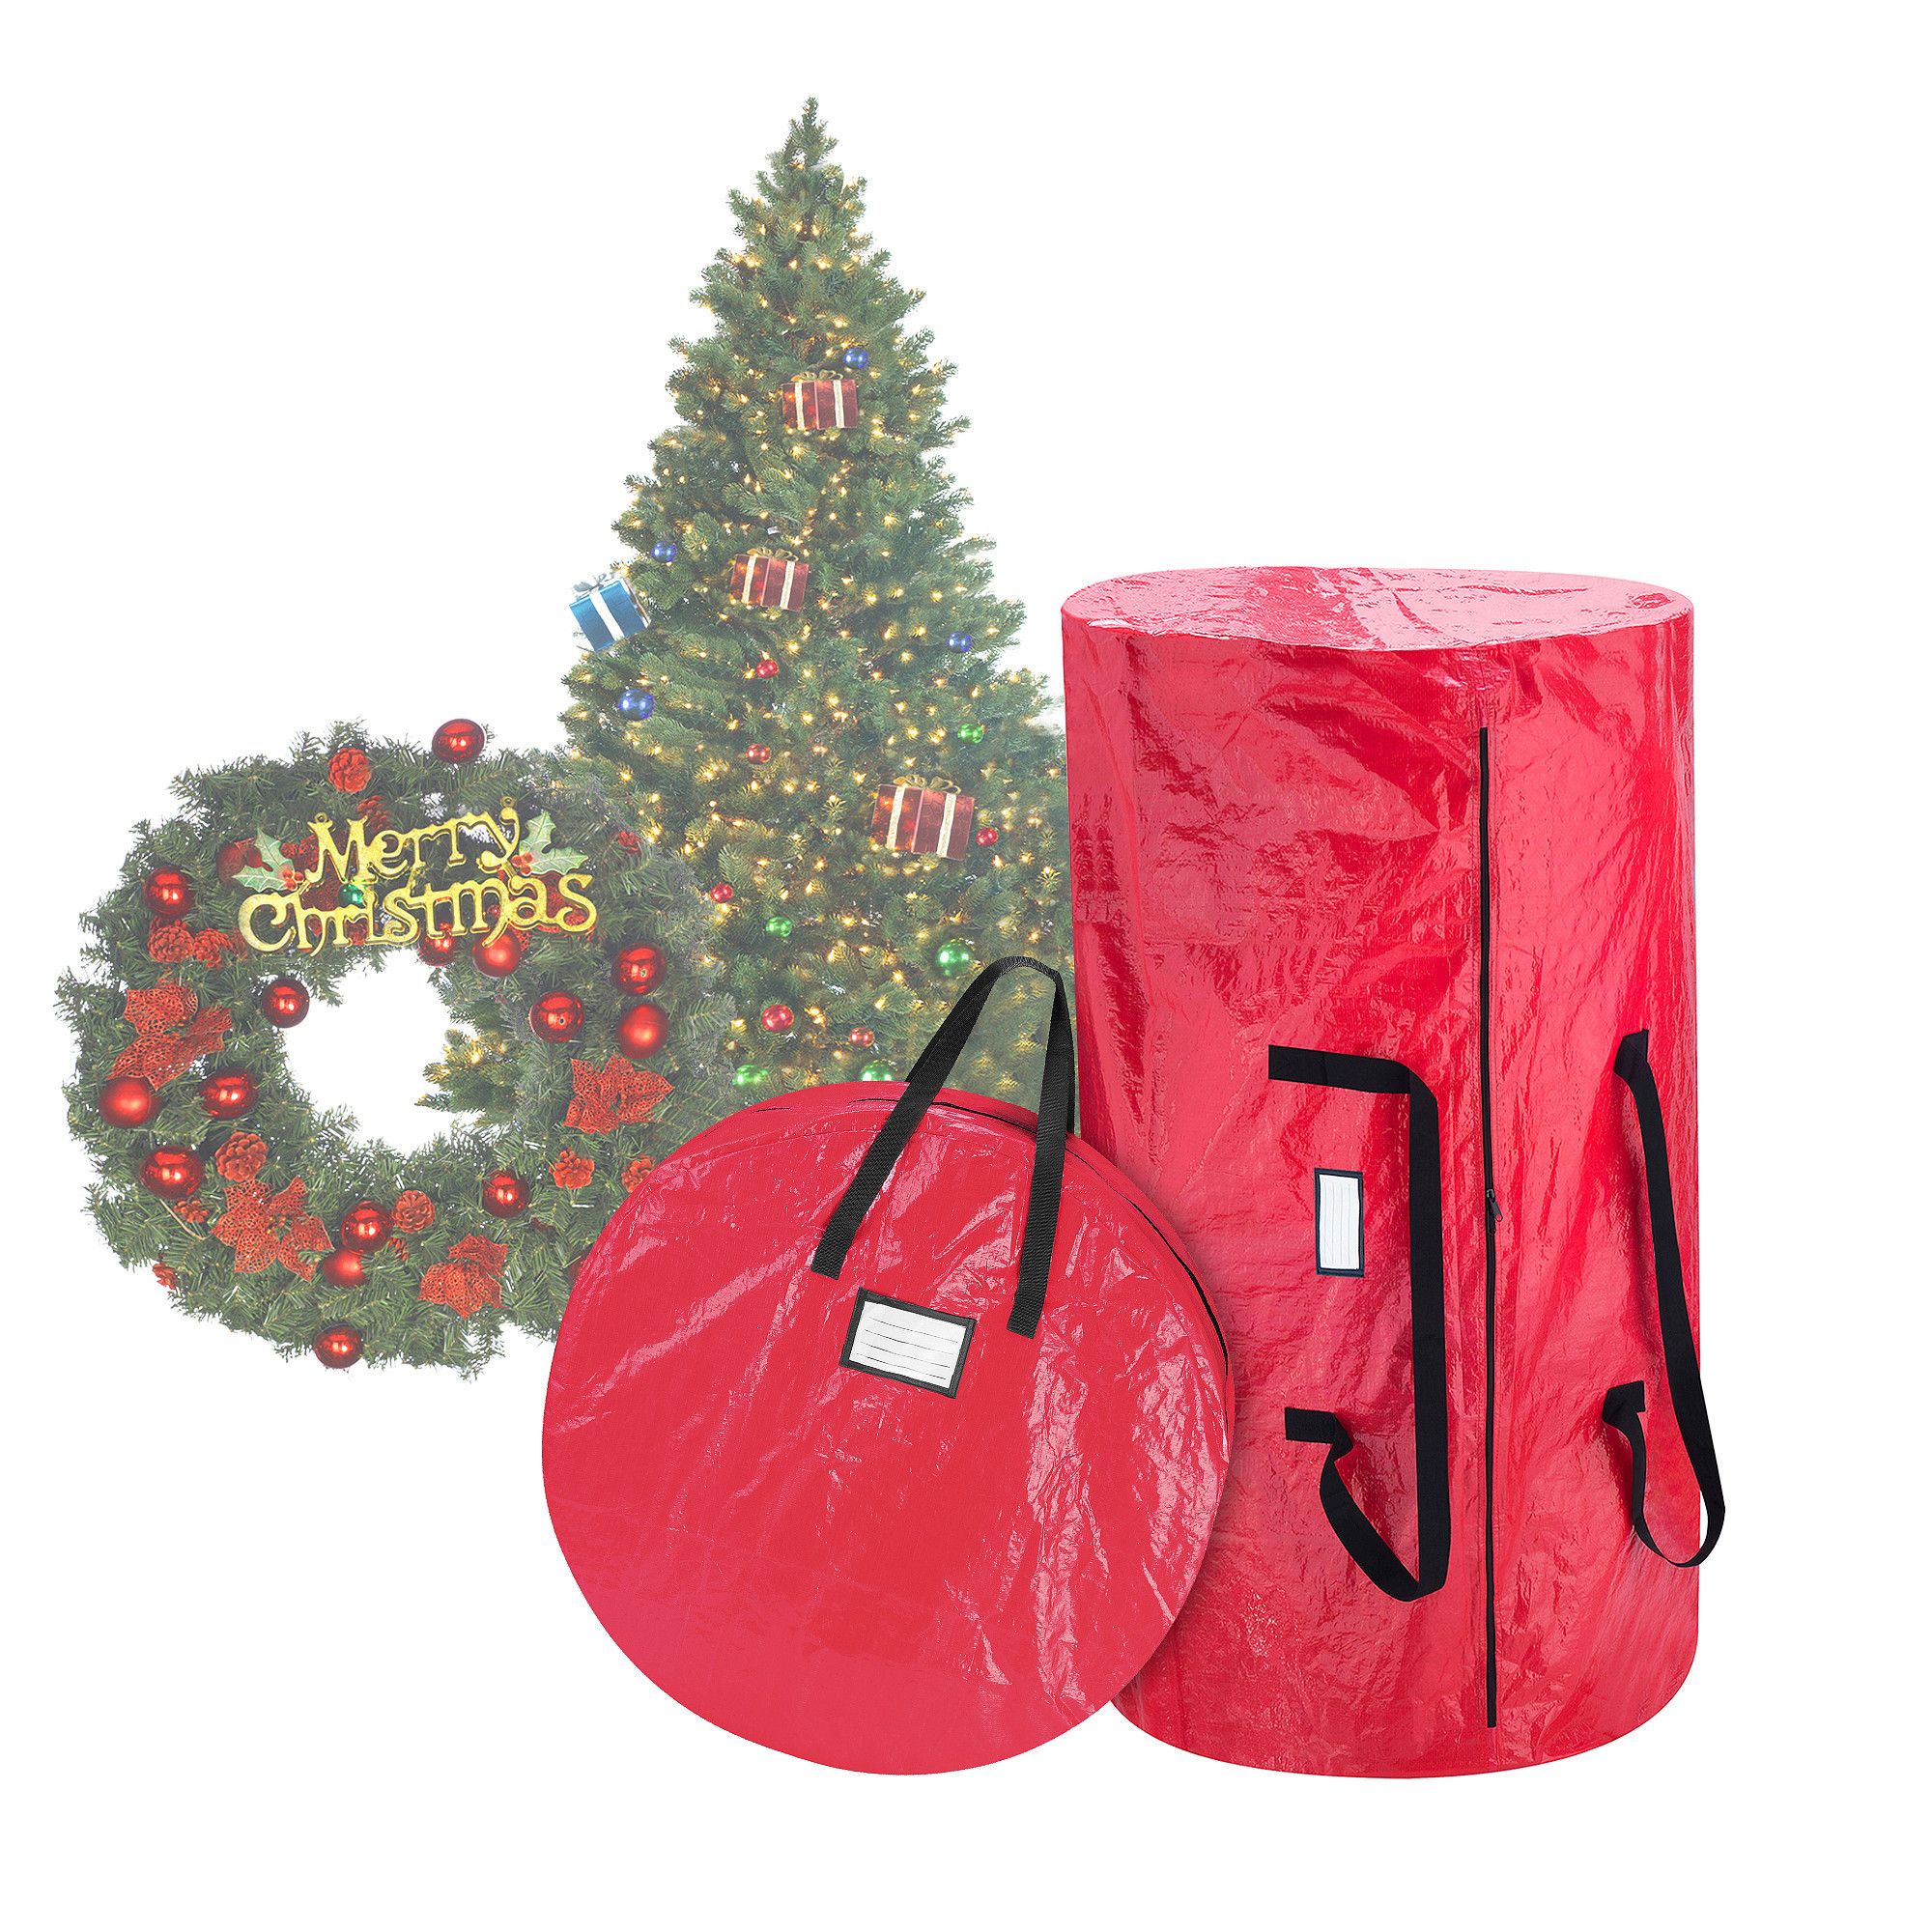 Christmas Tree Cover For Storage
 Elf Stor Deluxe Christmas Tree Storage Bag and Canvas